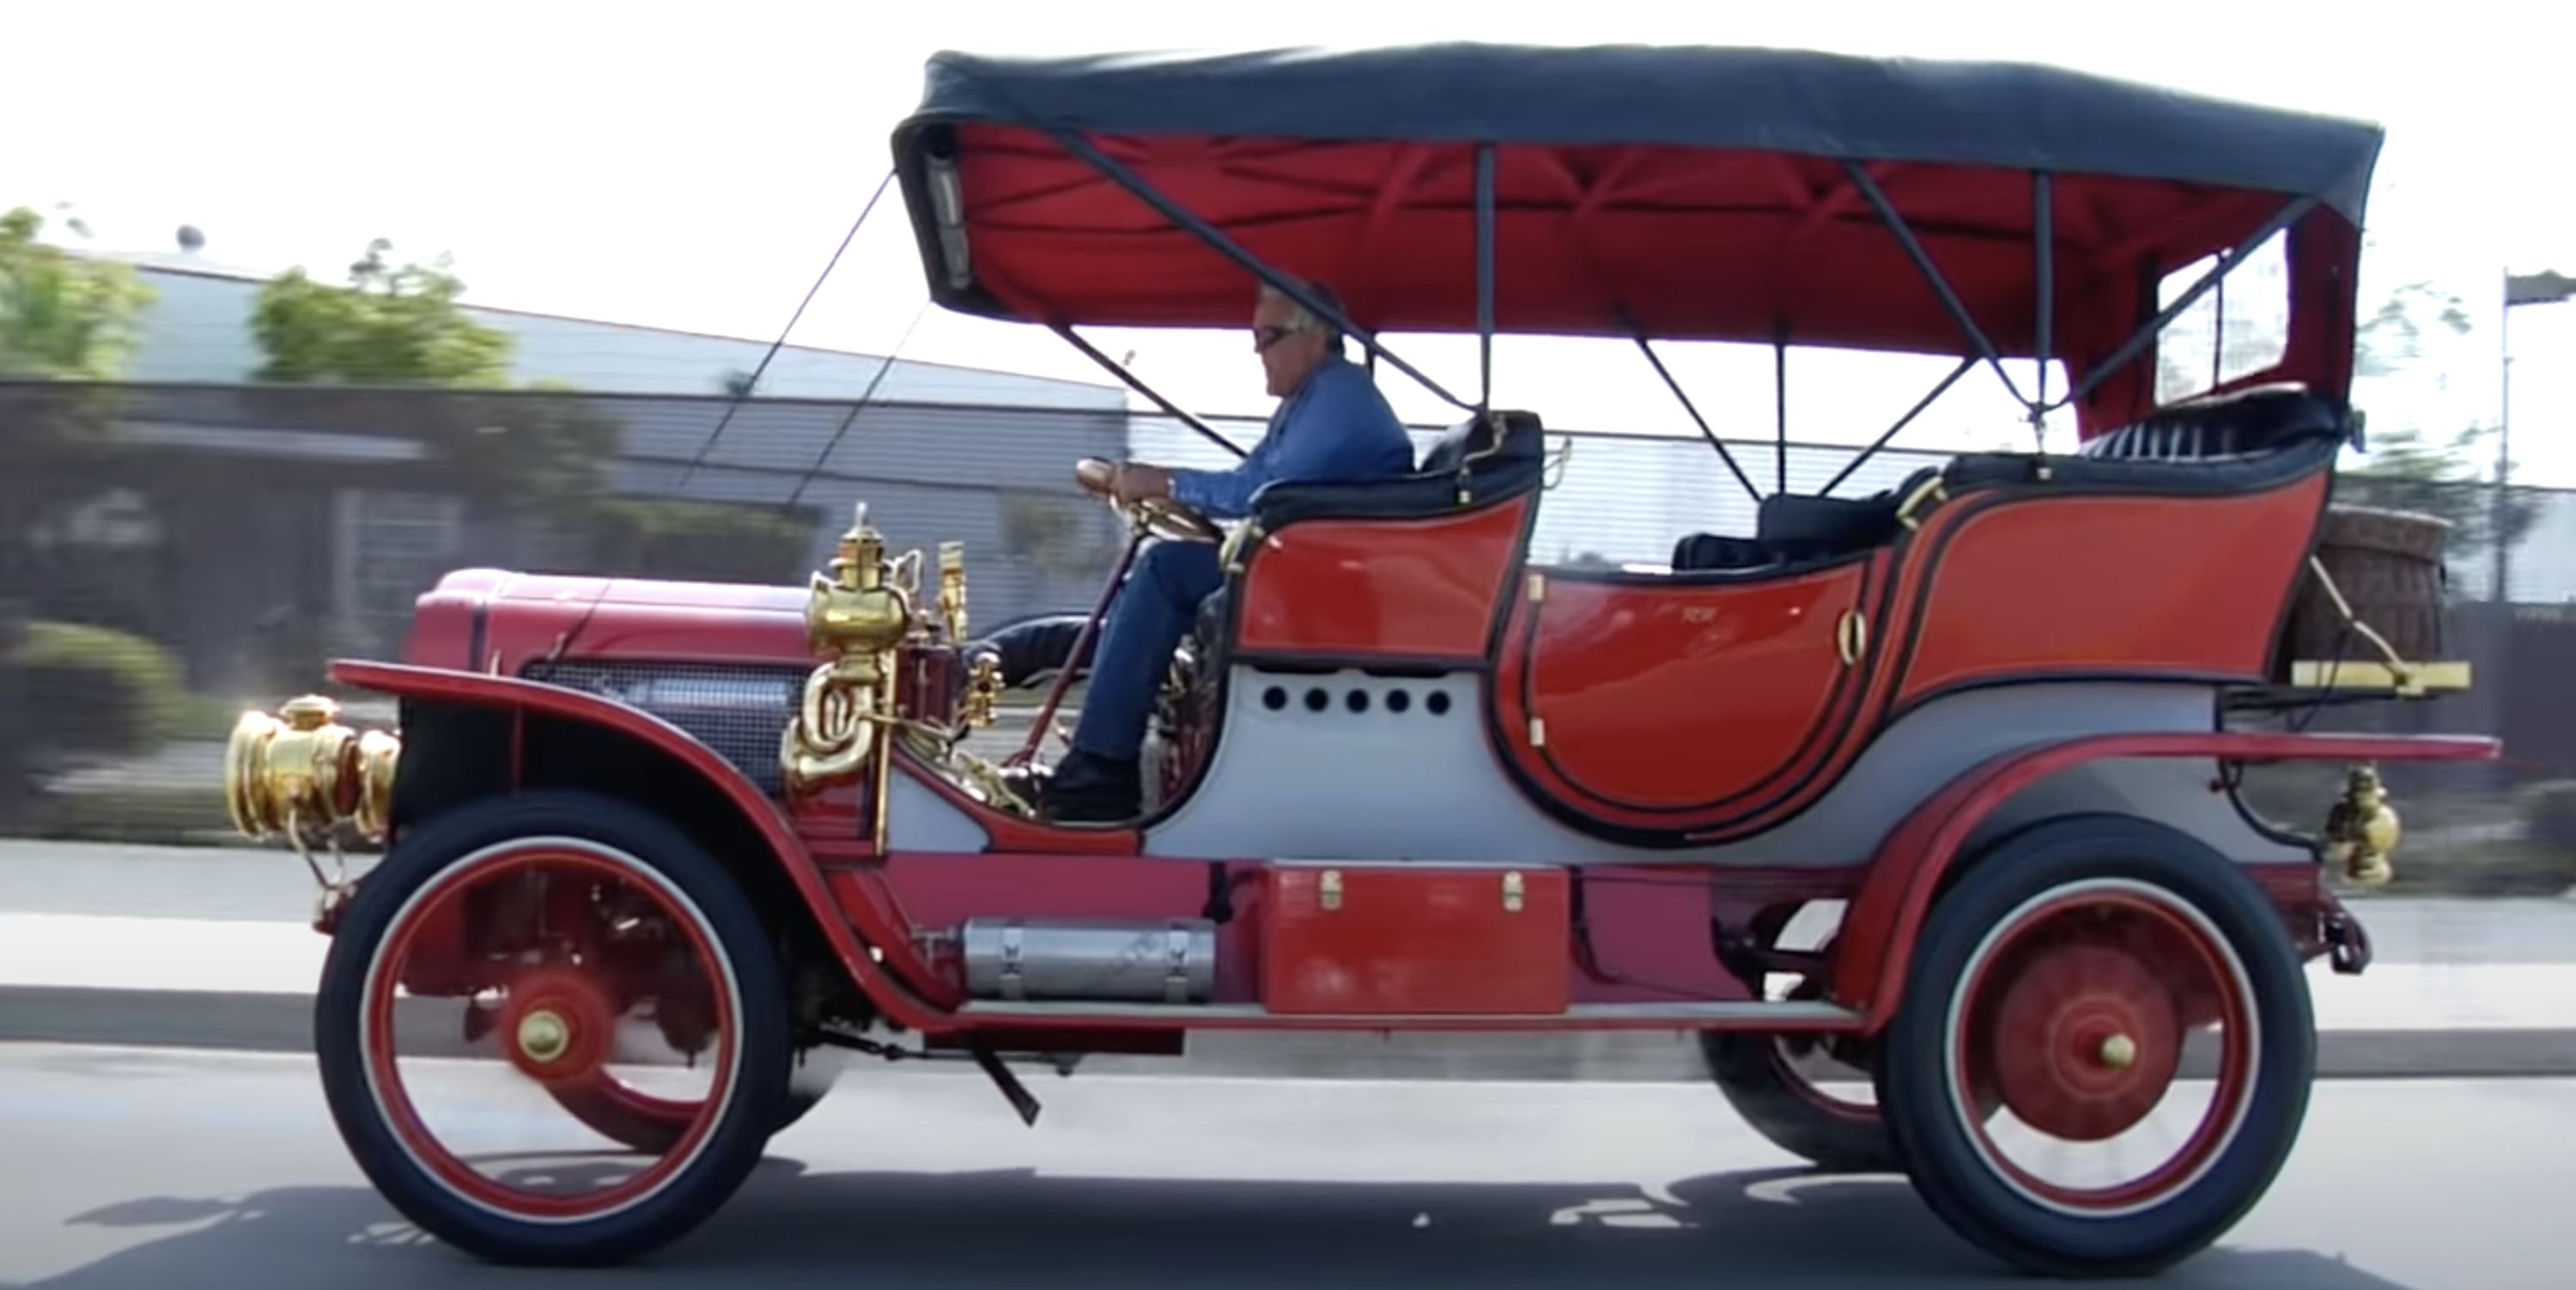 Jay Leno Was Working on 1907 Steam Car When Gas Fire Erupted